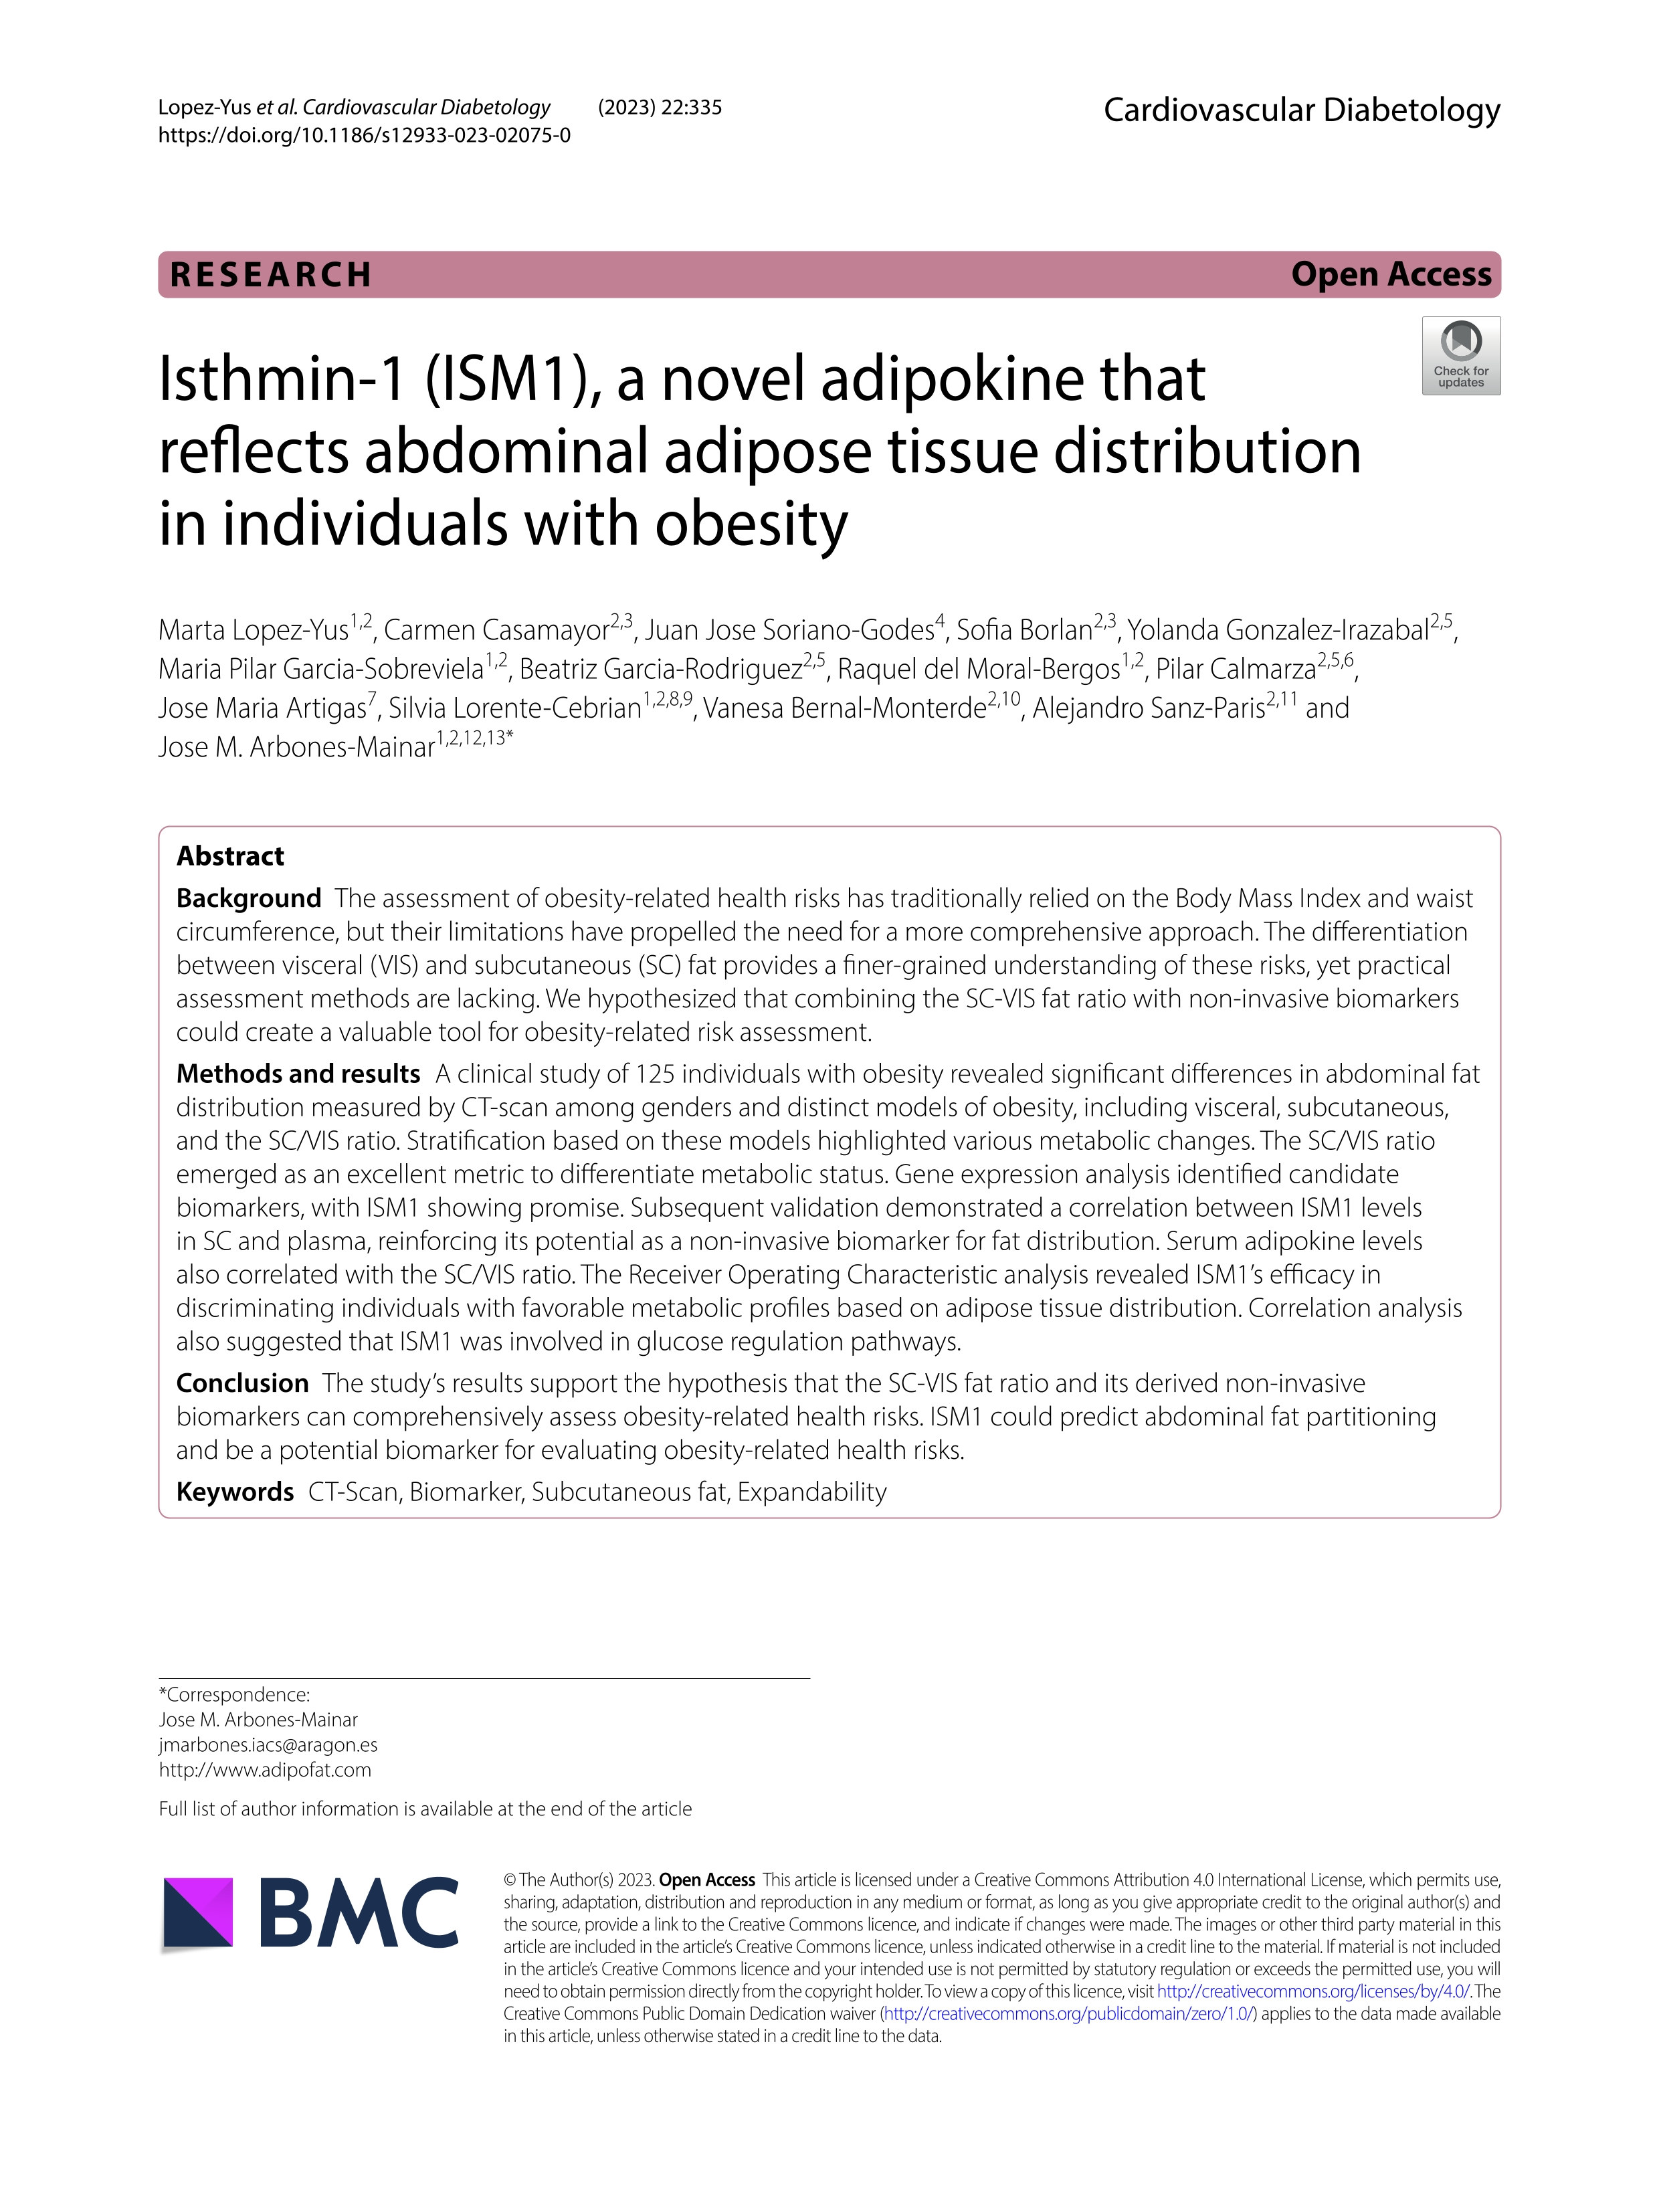 Isthmin-1 (ISM1), a novel adipokine that reflects abdominal adipose tissue distribution in individuals with obesity